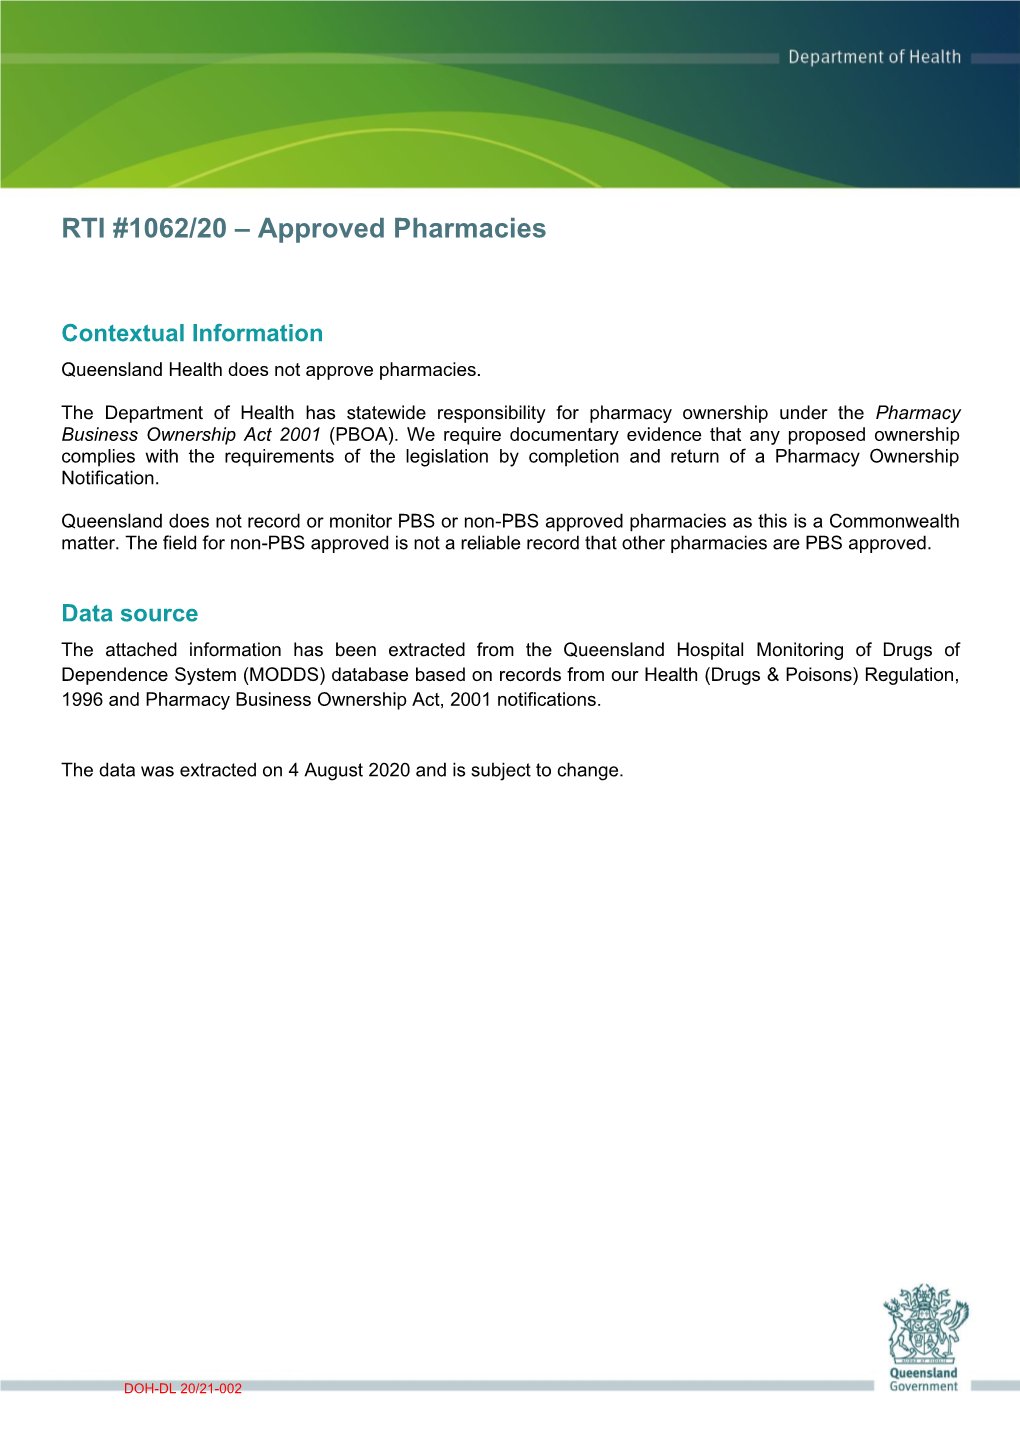 RTI #1062/20 – Approved Pharmacies